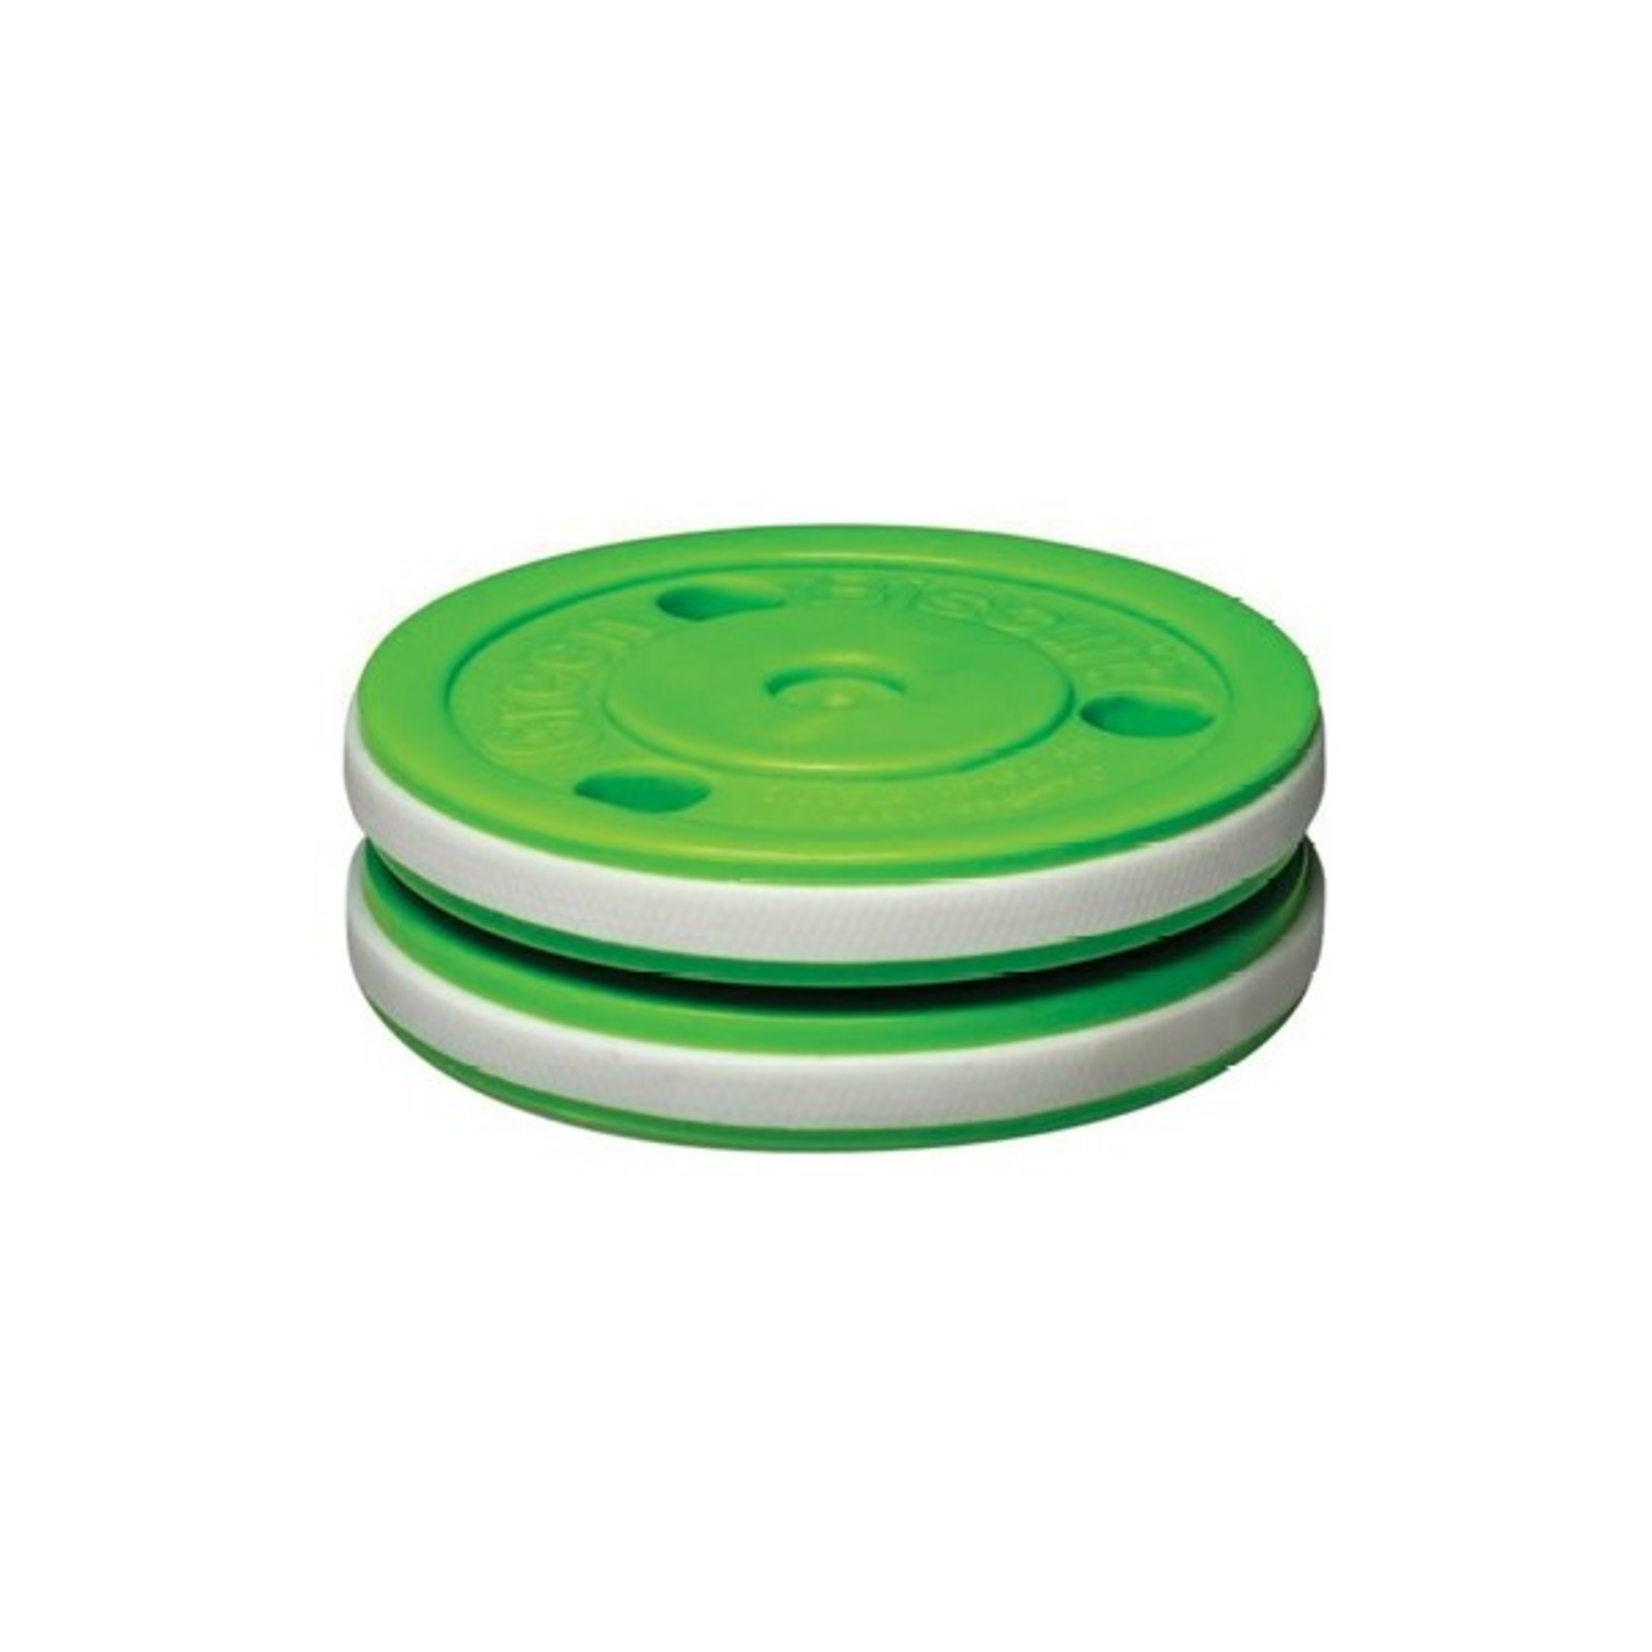 Blue Sports Green Biscuit Puck